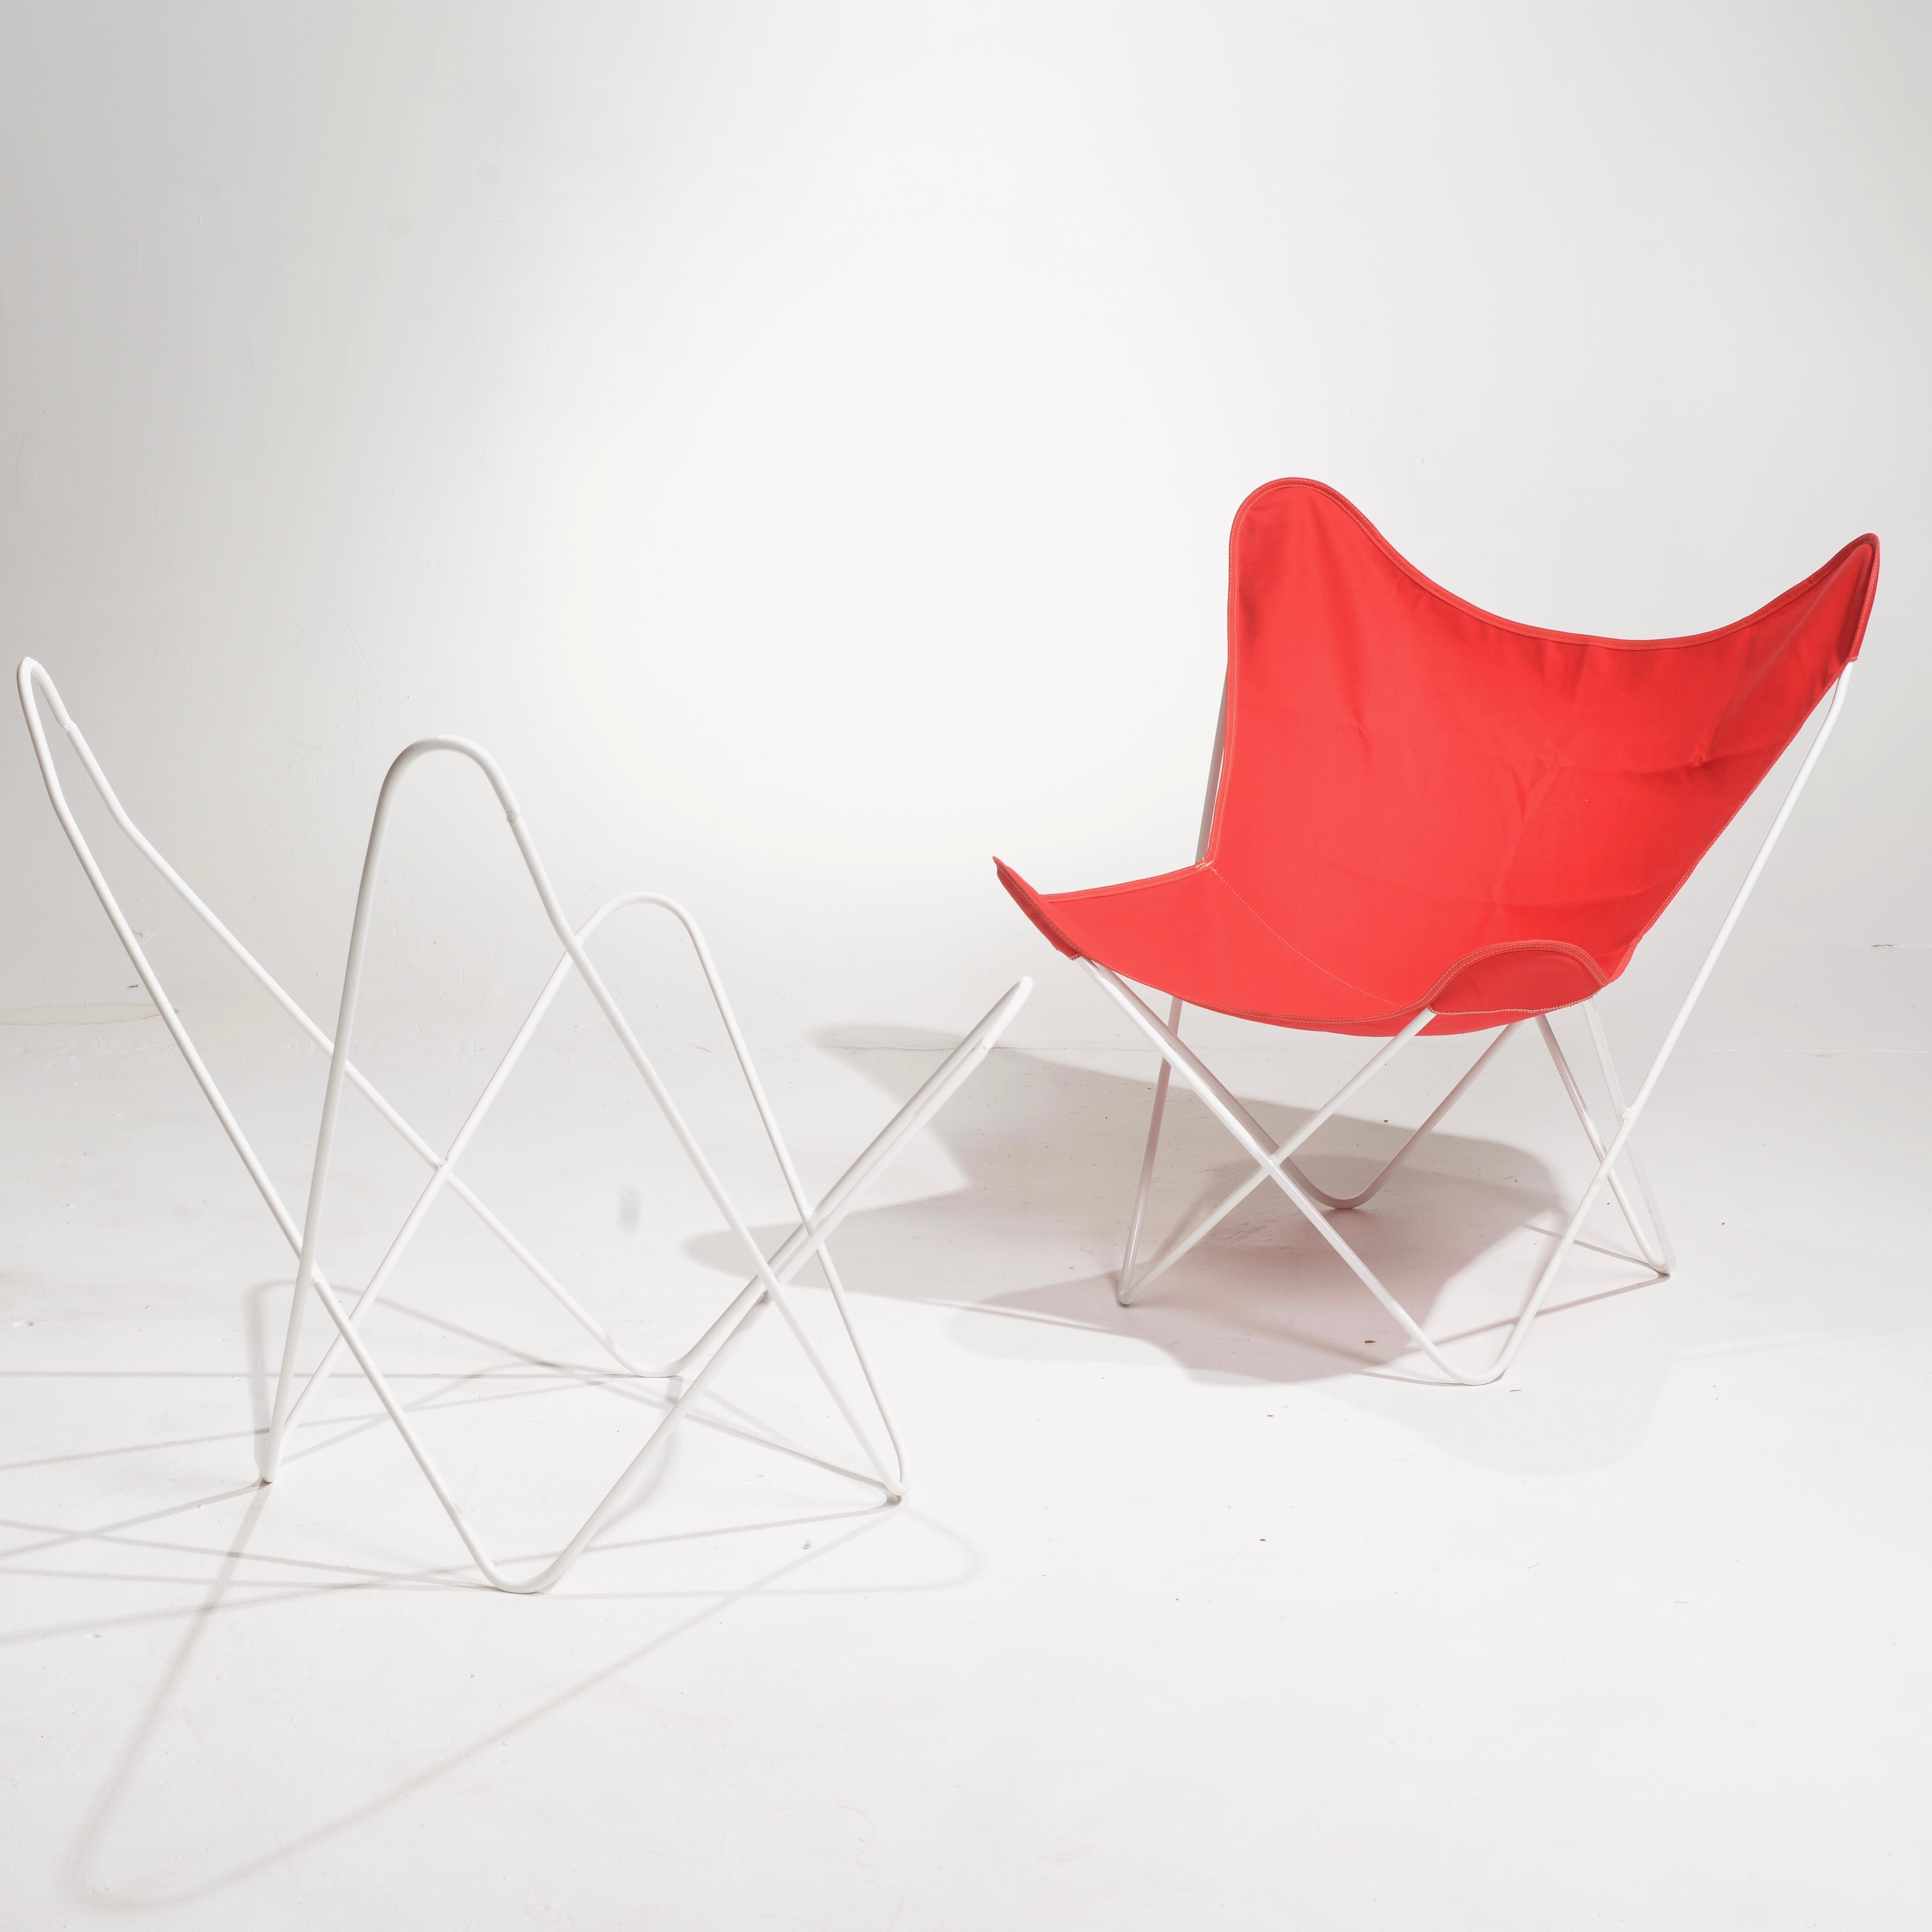 Late 20th Century Vintage Mid-Century BKF Hardoy Butterfly Chair for Knoll For Sale